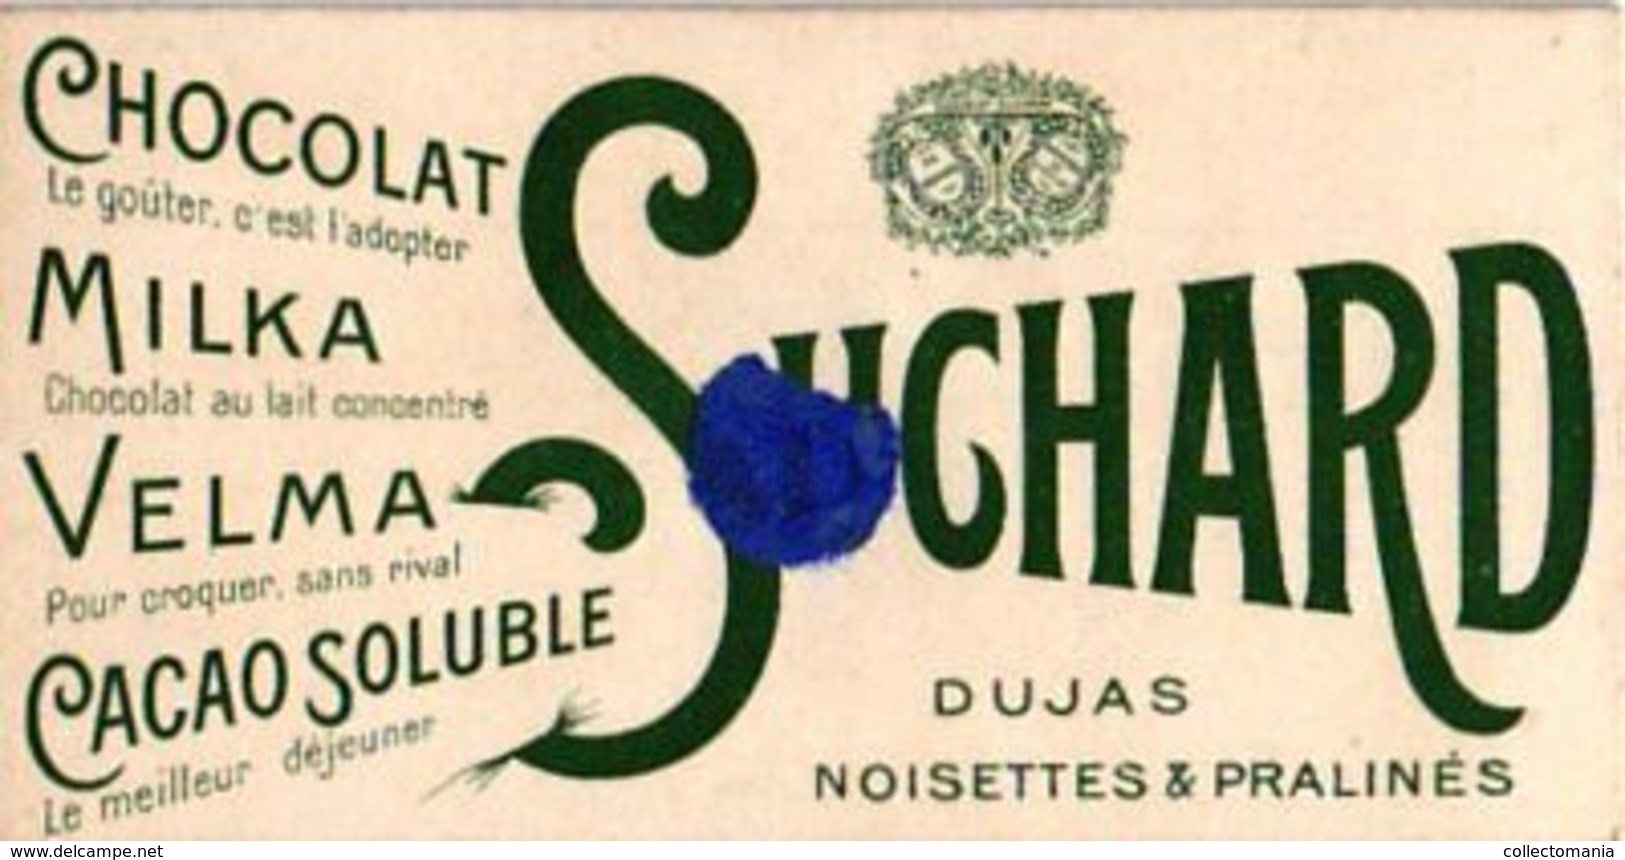 12 chromos litho cards chocolate SUCHARD set71B c1899 Suchard French Provinces with products and industry